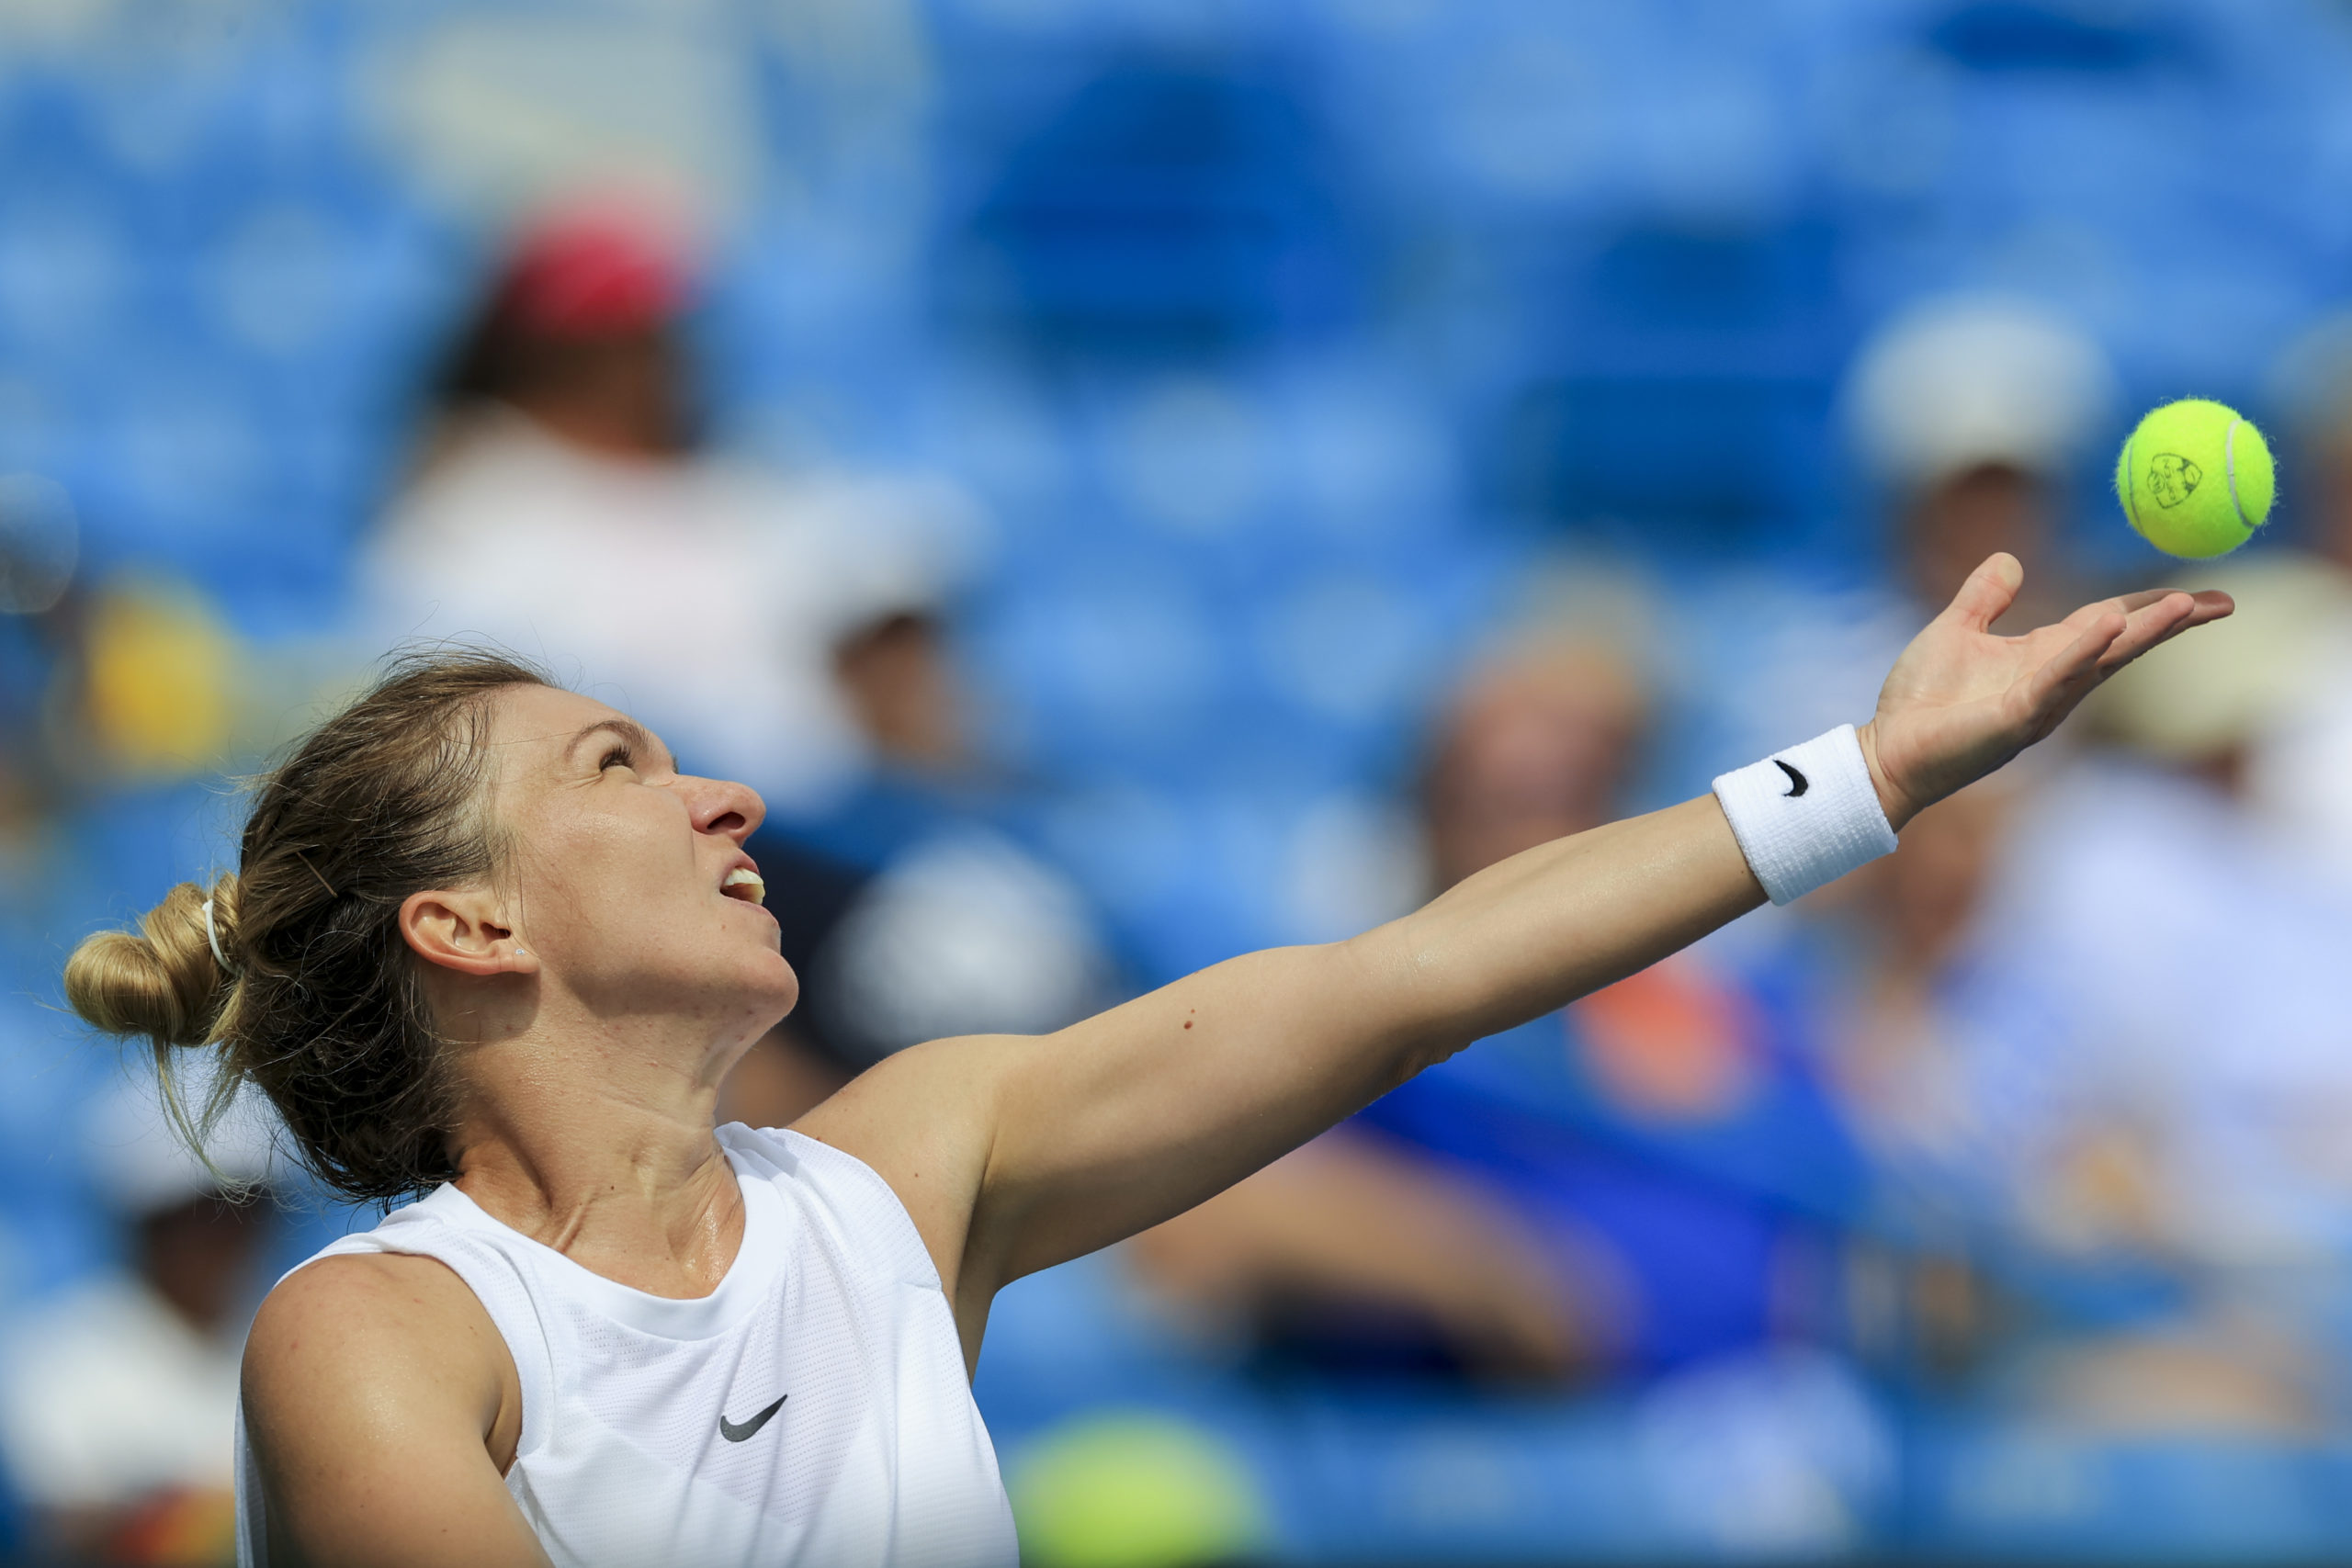  Simona Halep (ROU) serves the ball against Magda Linette (POL) during the Western and Southern Open tennis tournament at Lindner Family Tennis Center. 